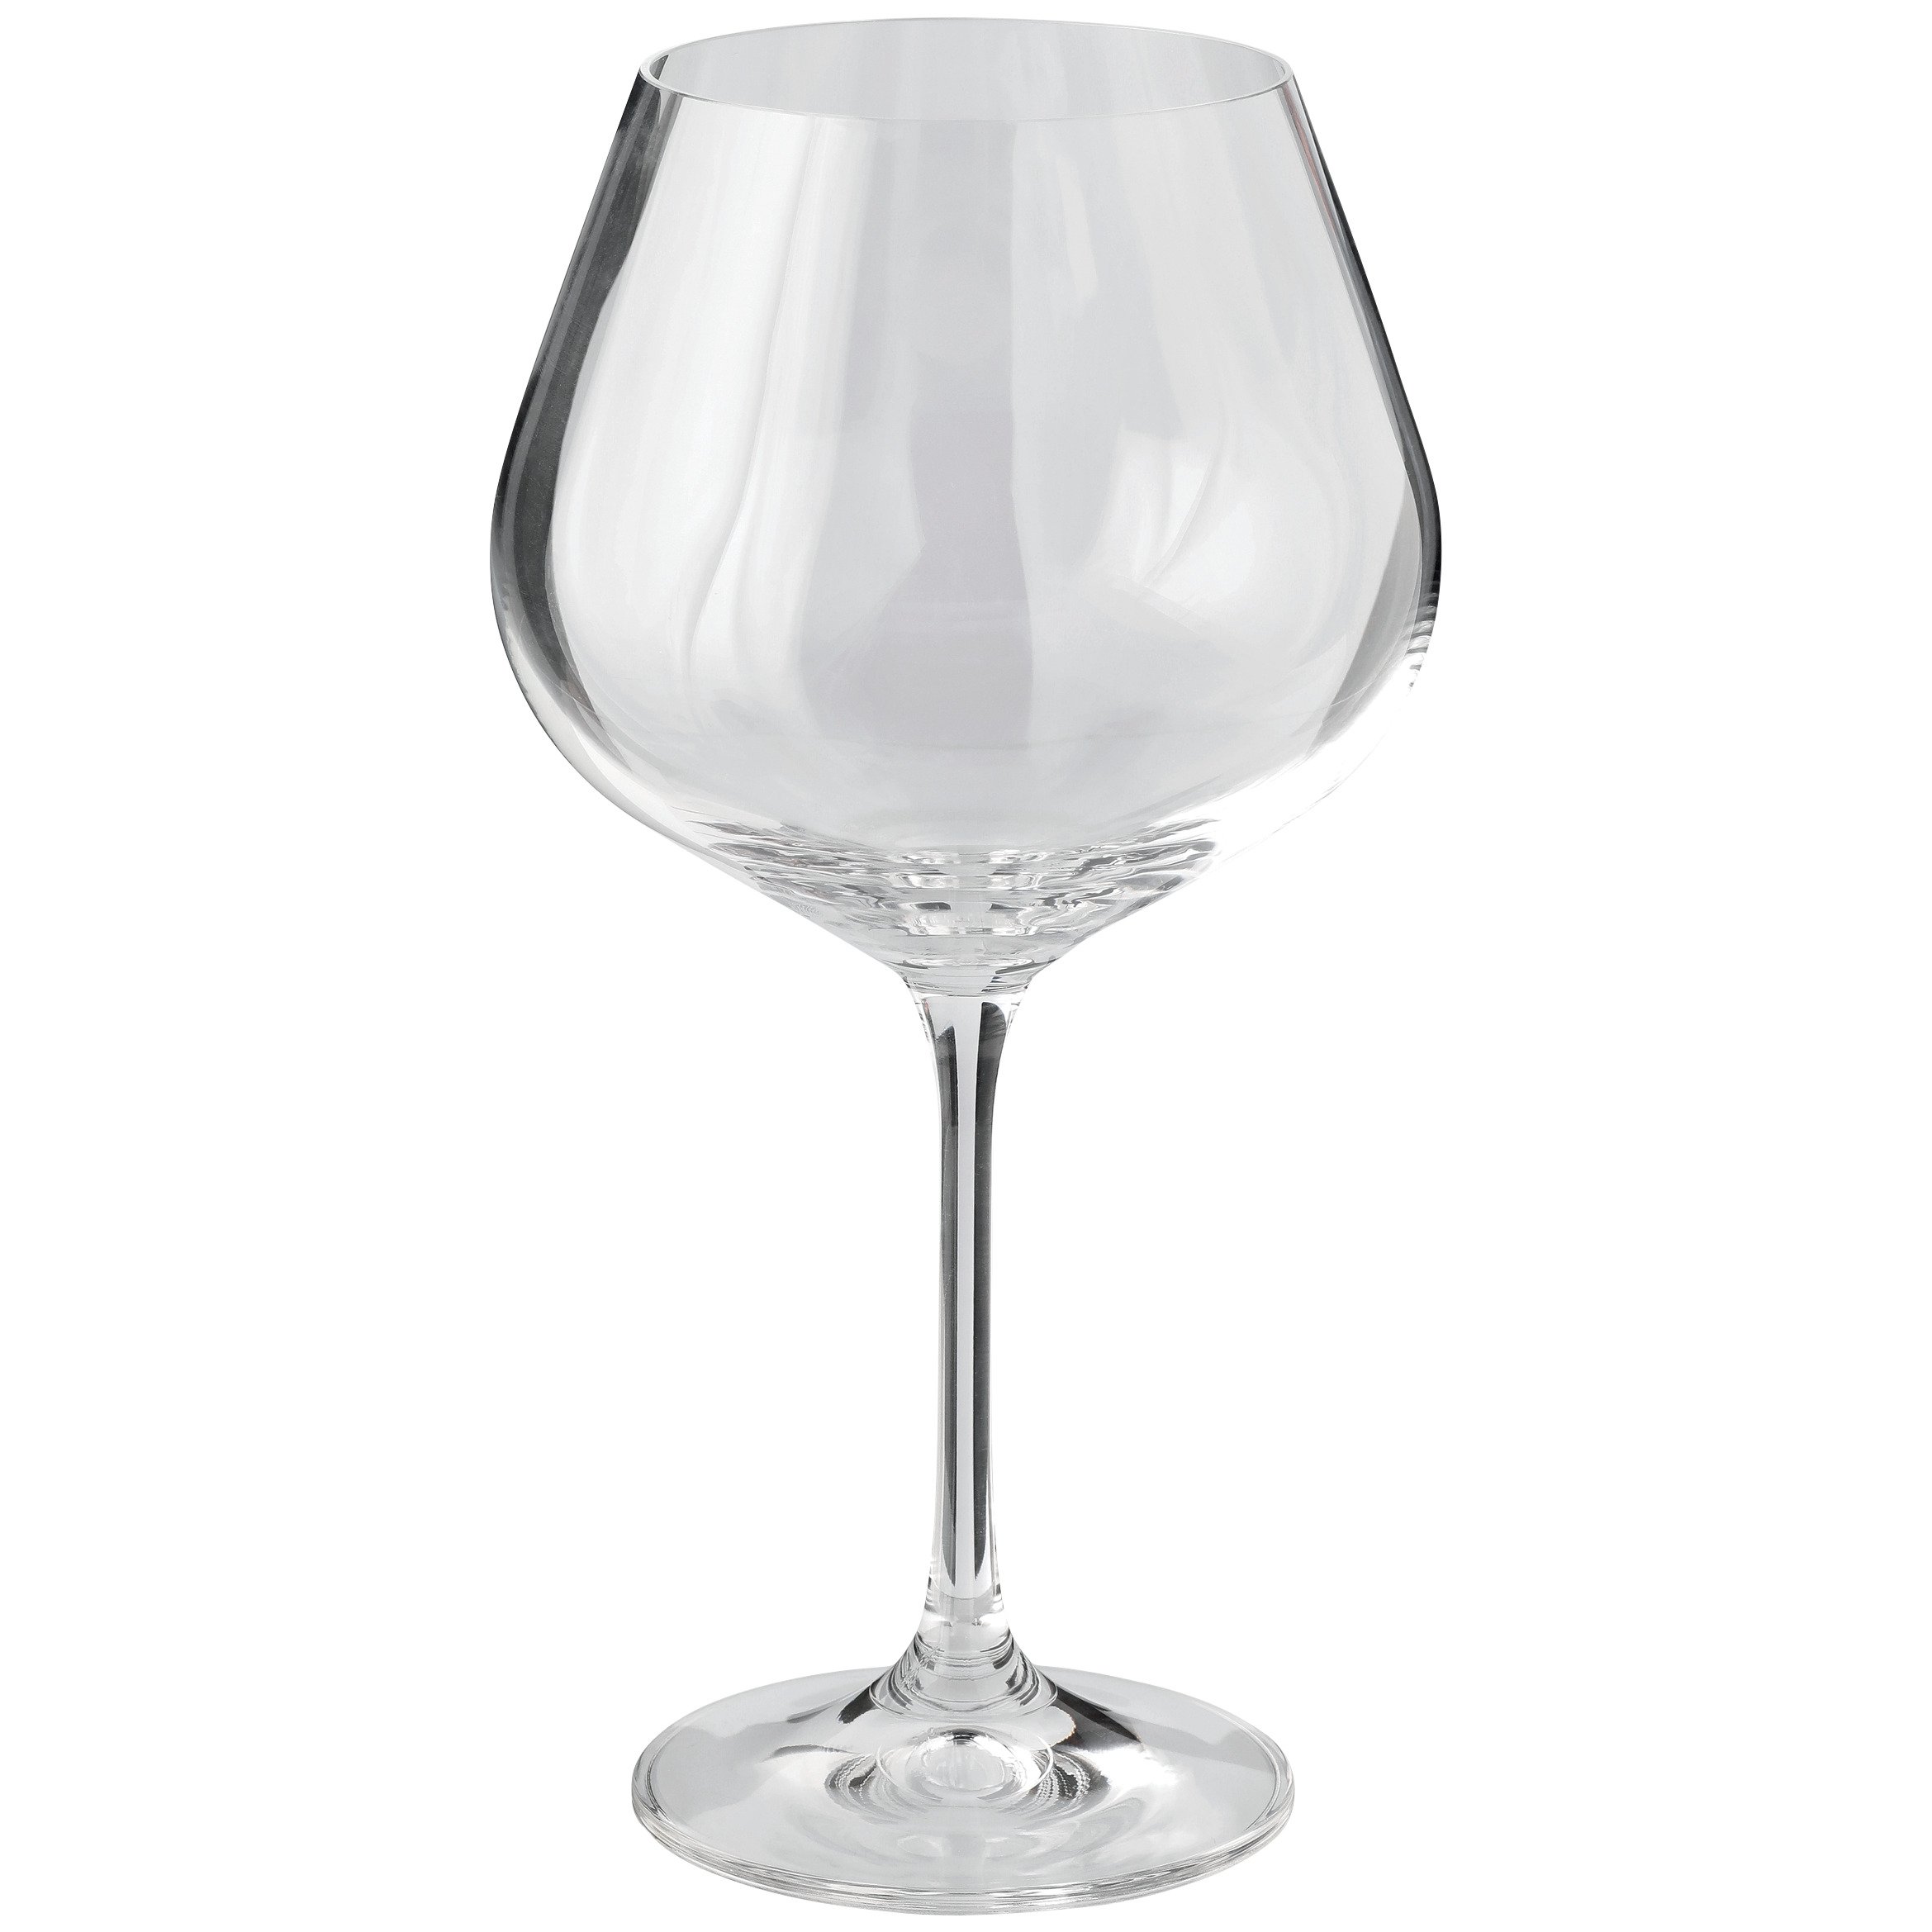 EBM Crystal Glass Lacquered Pair Wine Glass - Globalkitchen Japan